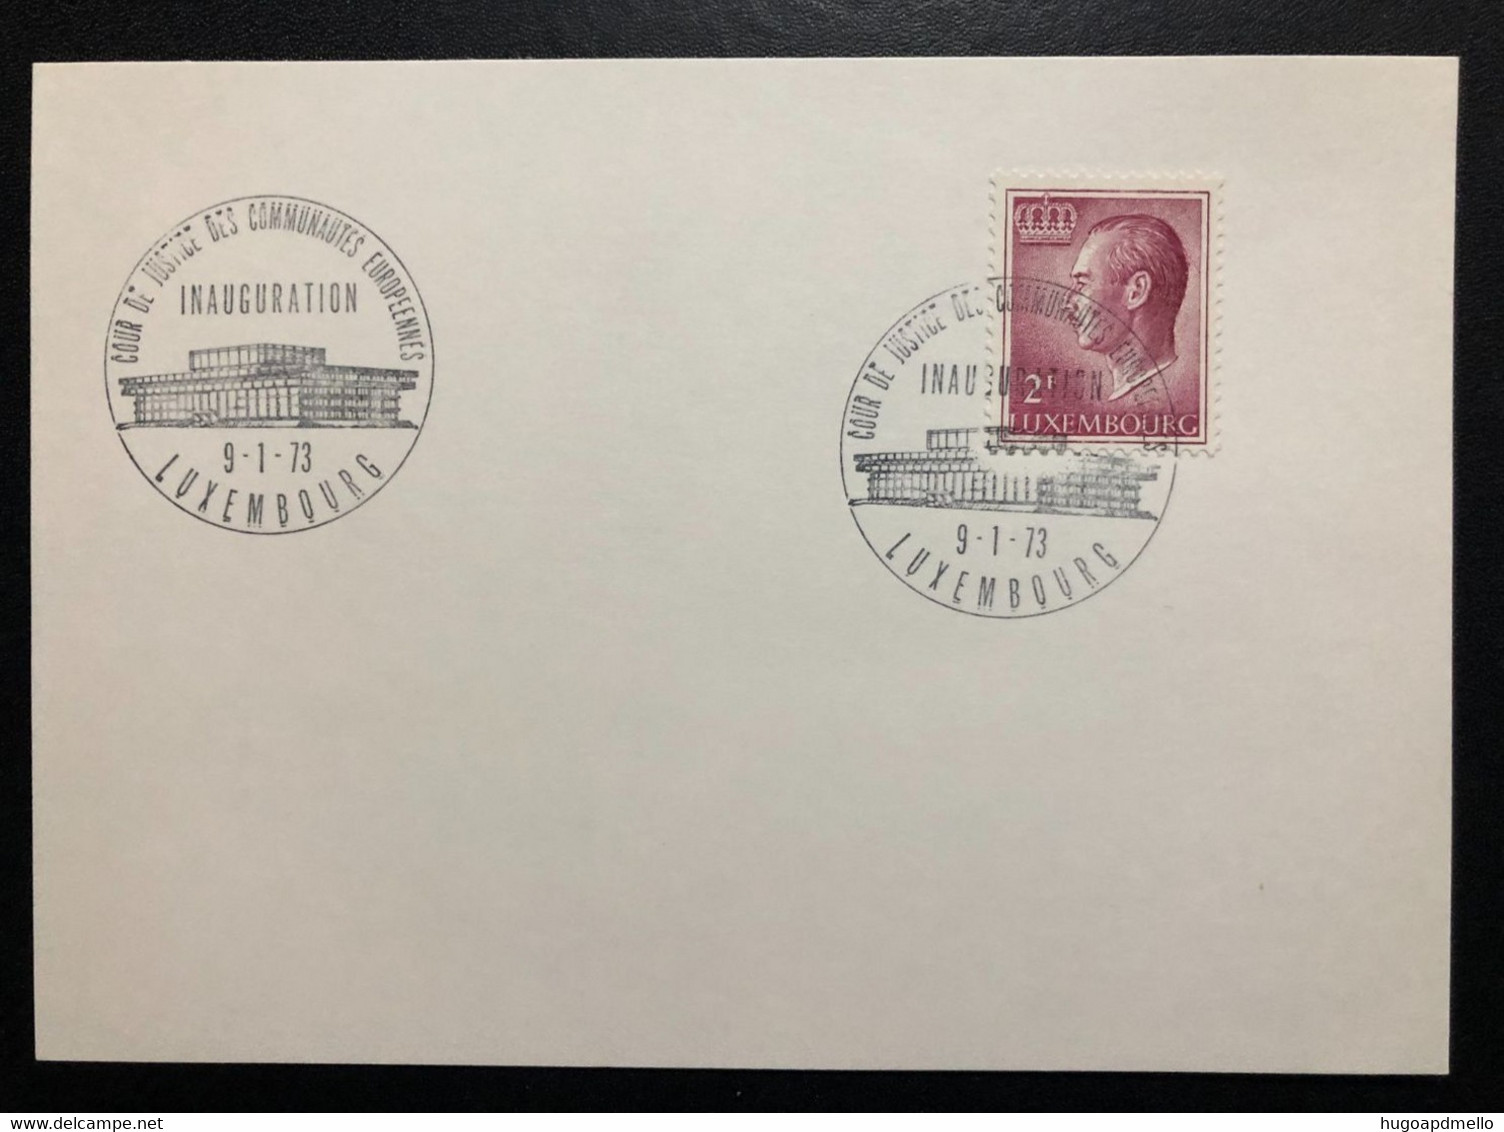 LUXEMBOURG, « Cour De Justice Des Communautés Europeennes - INAUGURATION », « Special Commemorative Postmark »,1973 - Covers & Documents